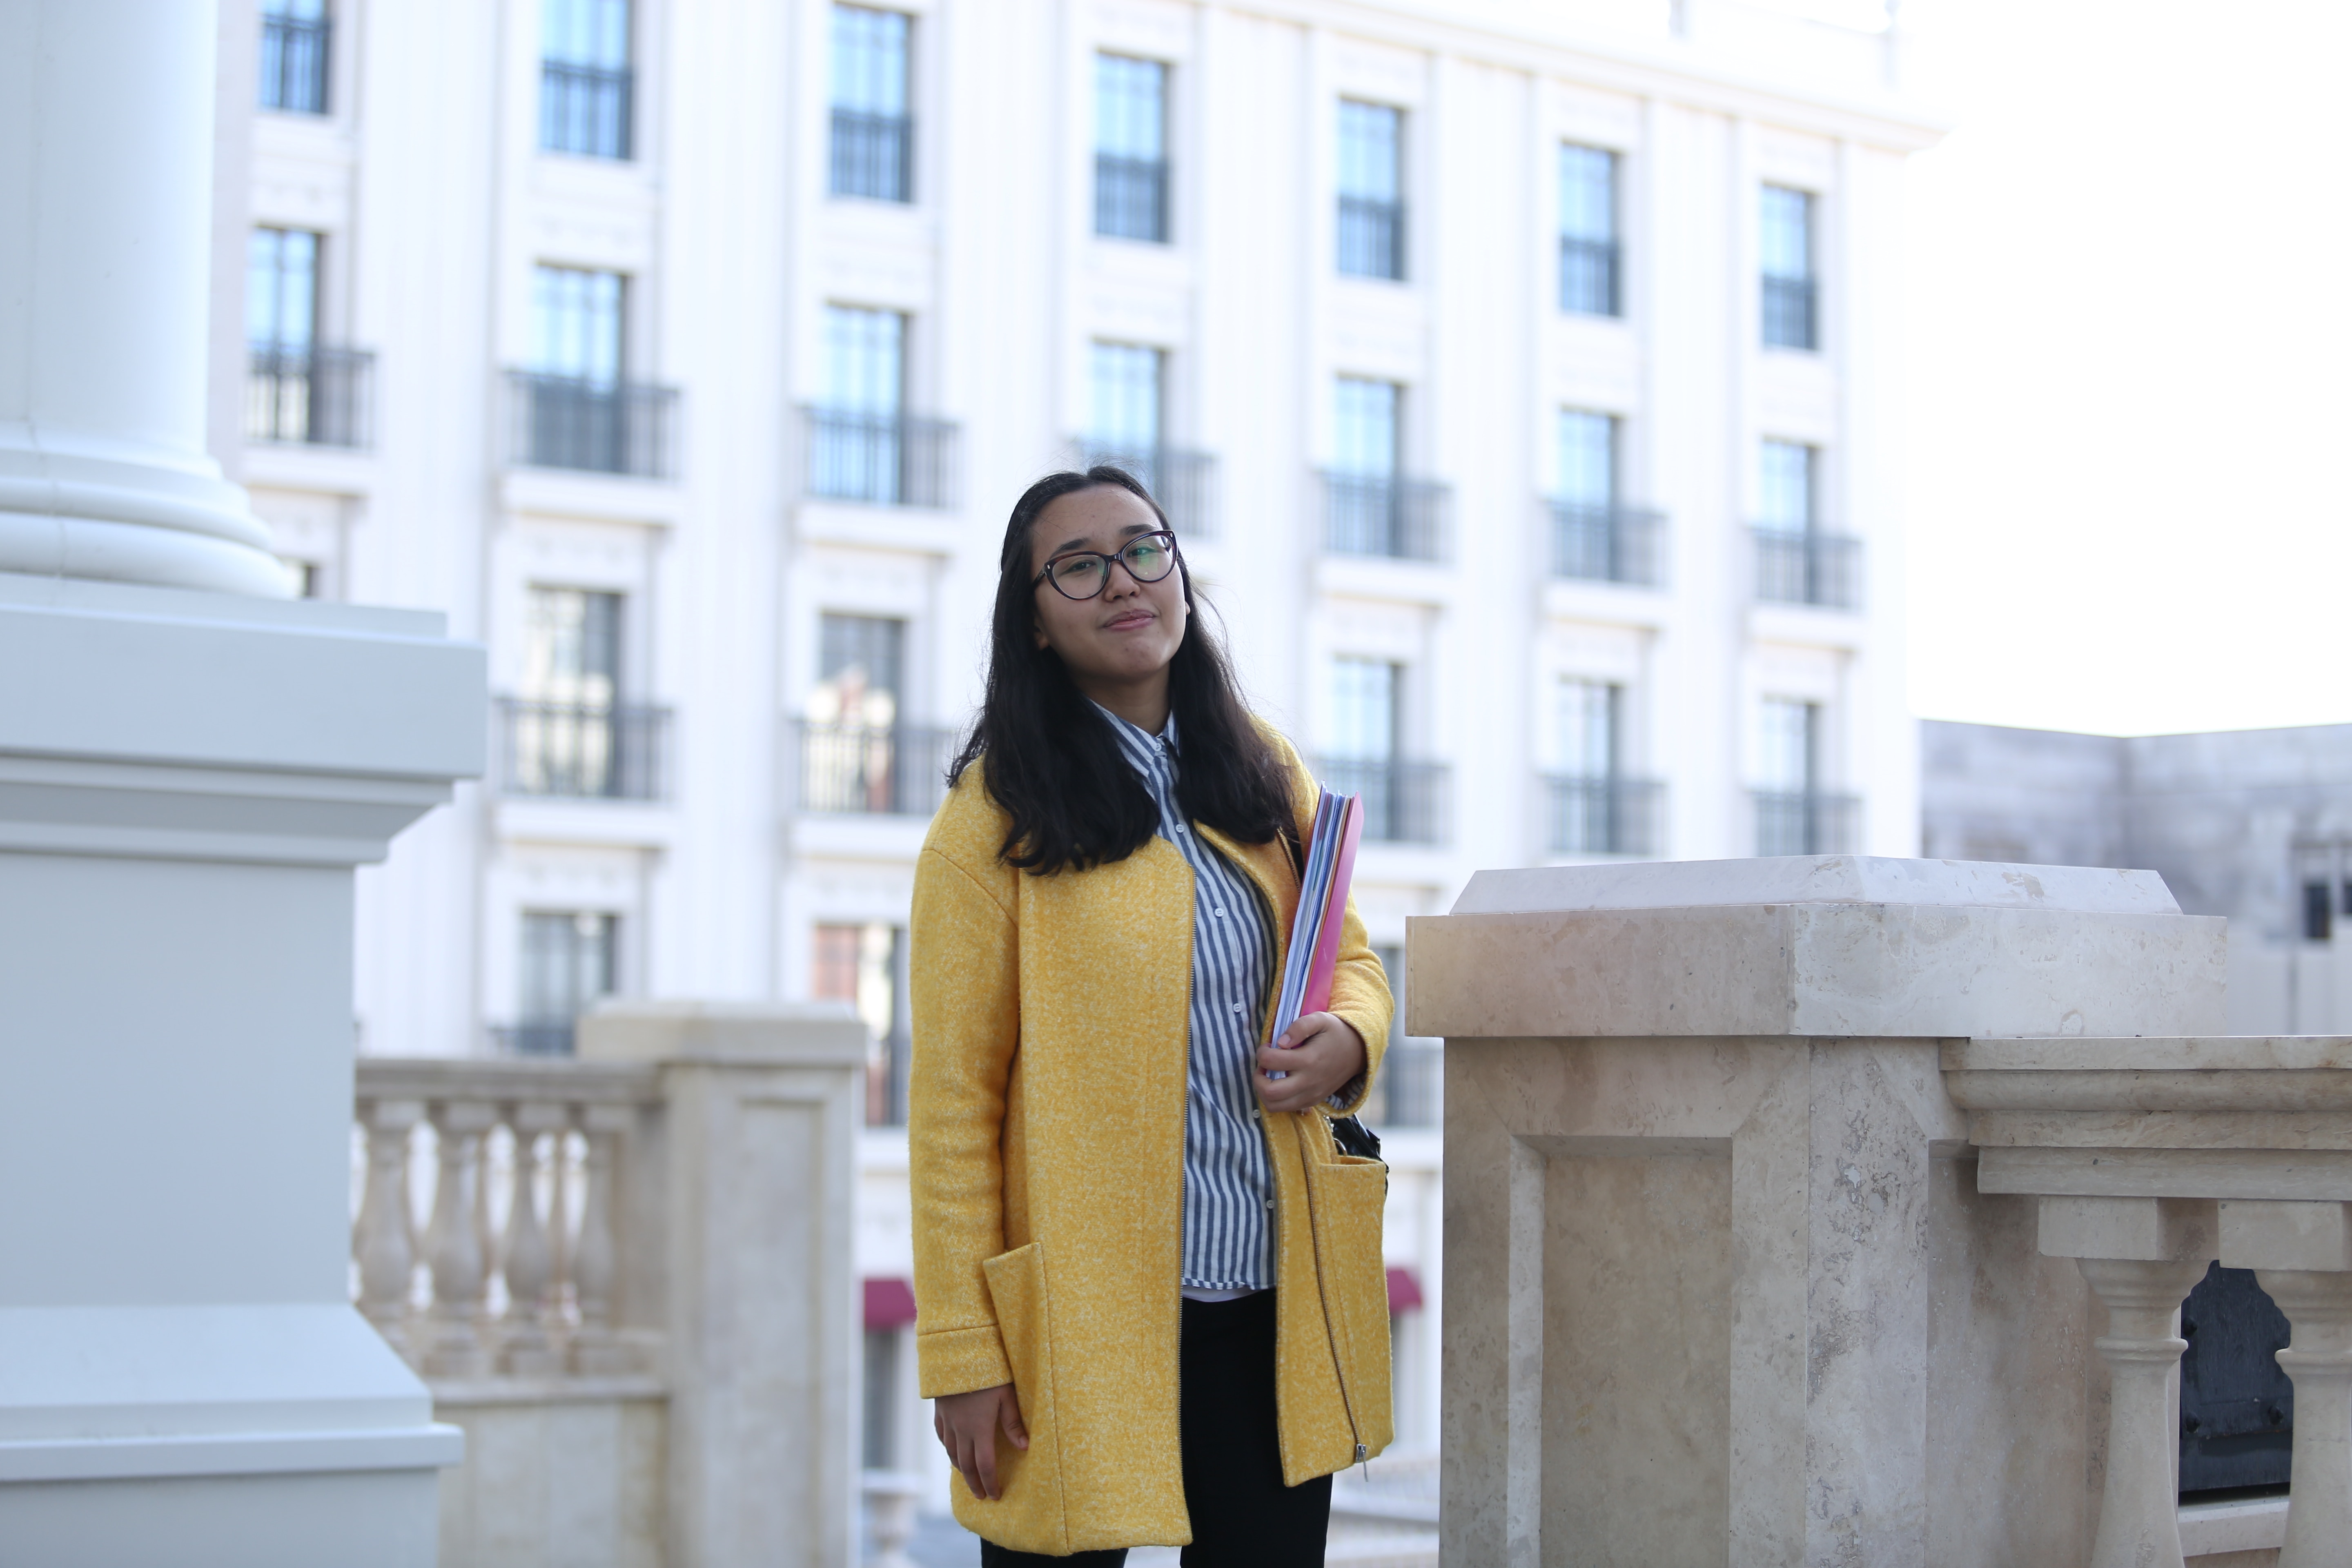 woman in white and black stripe shirt, black pants and yellow cardigan